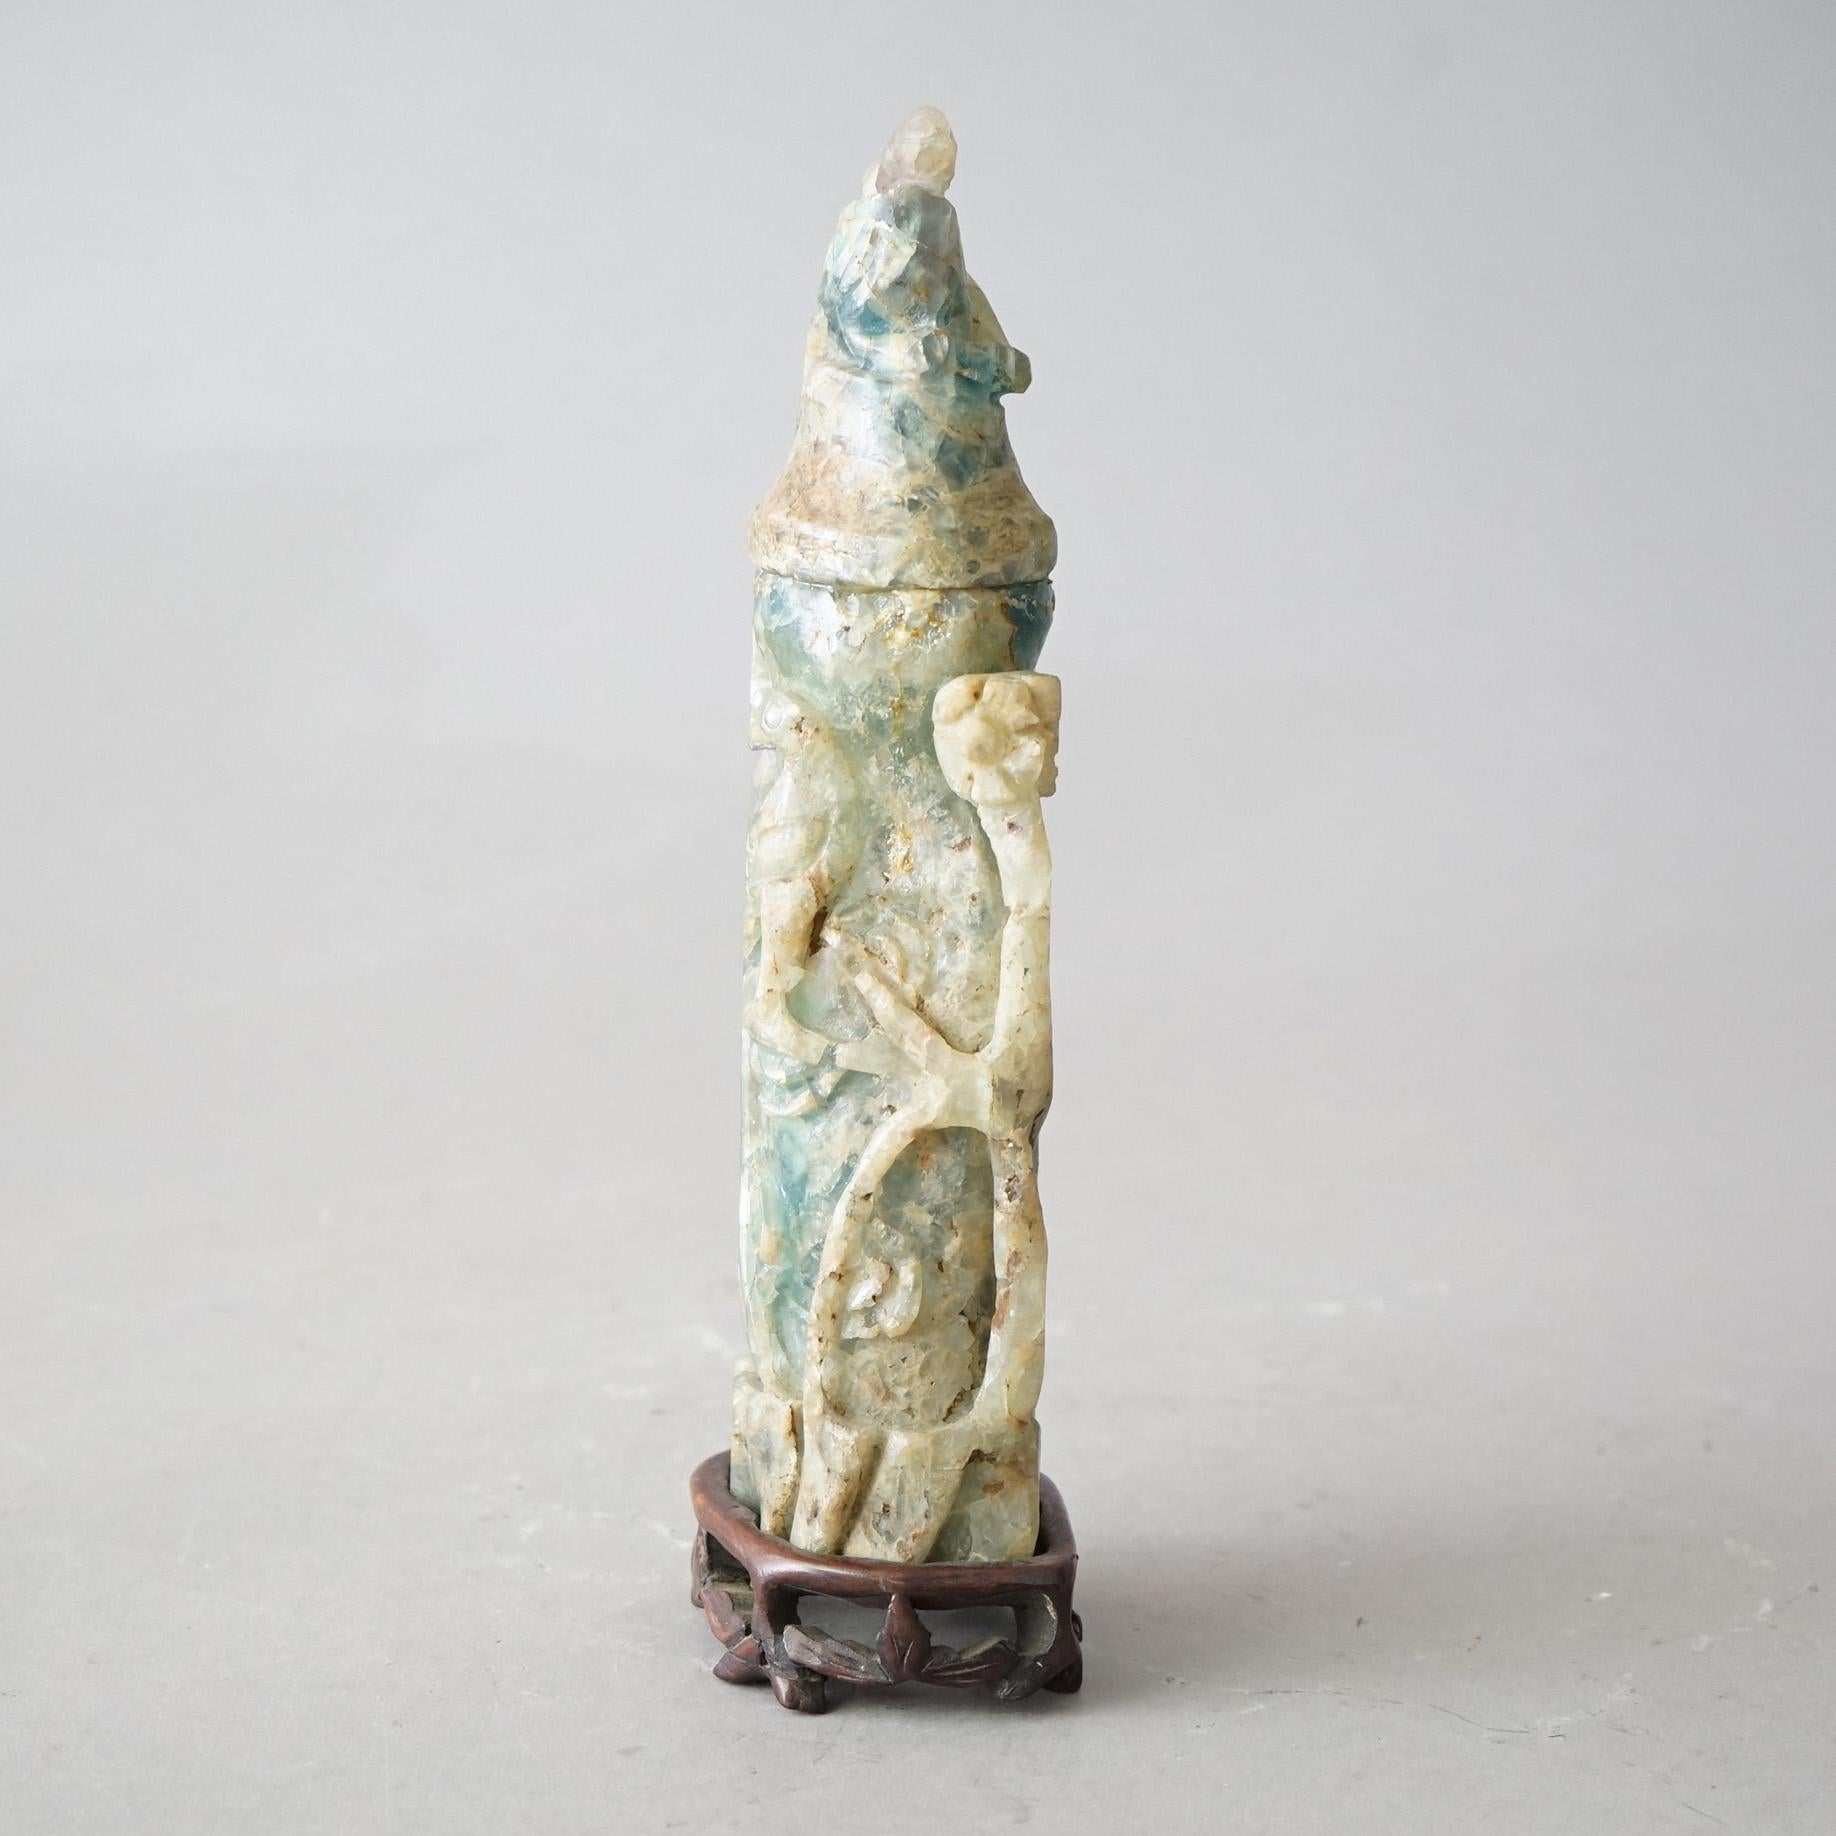 Antique Asian Carved Jade Soapstone Sculpture with Birds C1890 For Sale 1